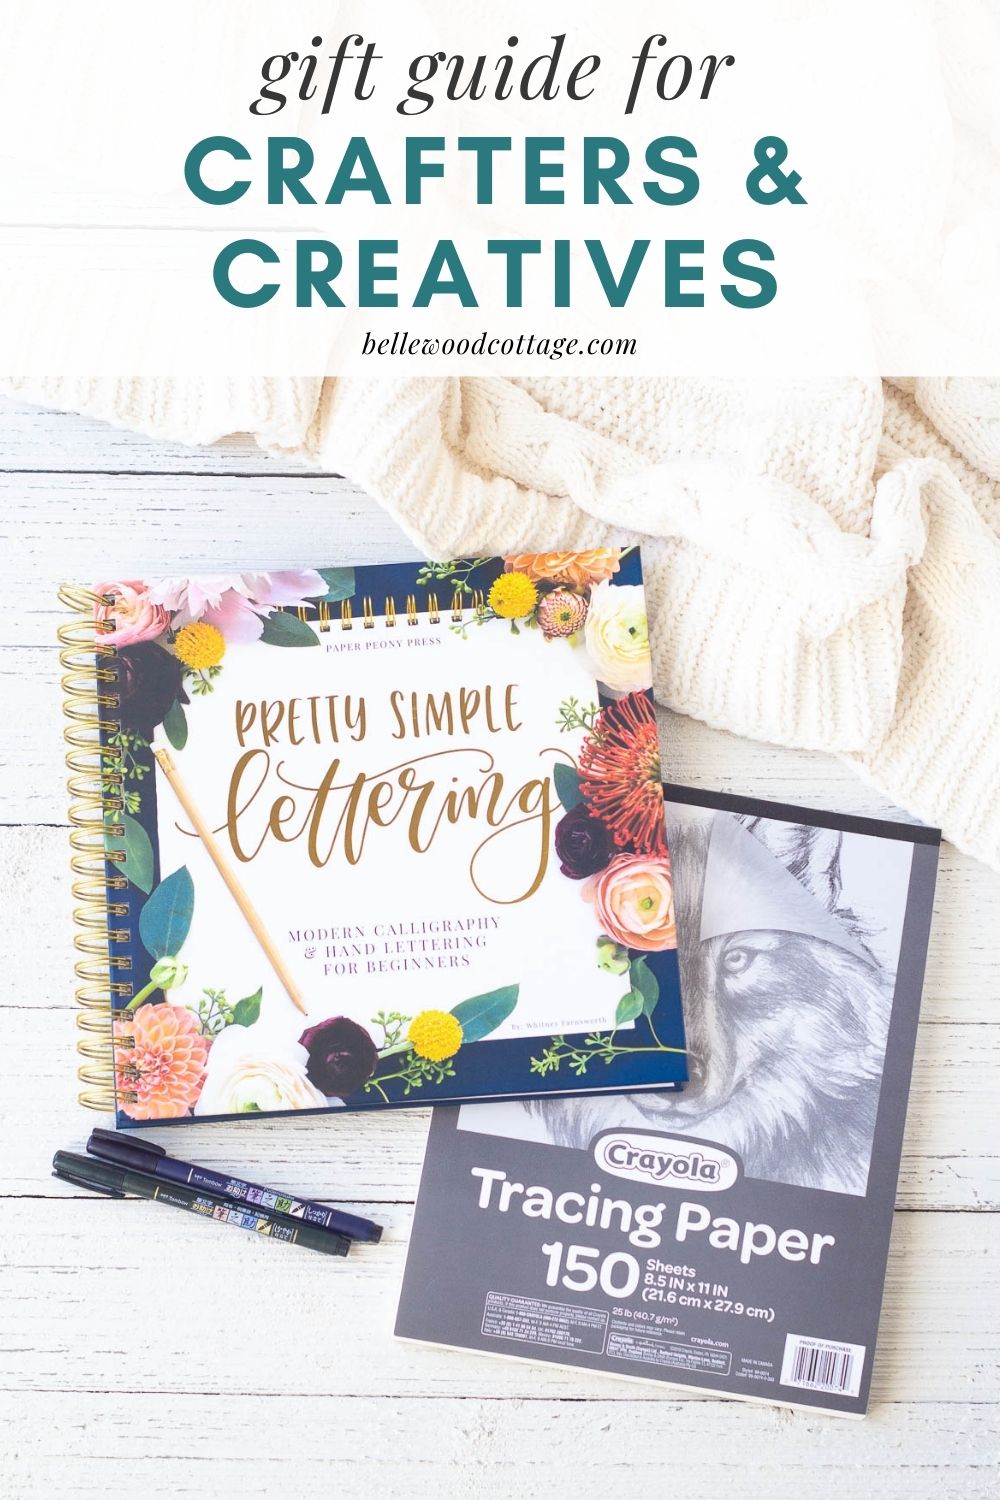 A hand-lettering instructional book alongside brush pens and tracing paper, with the words, "Gift Guide for Crafters and Creatives."